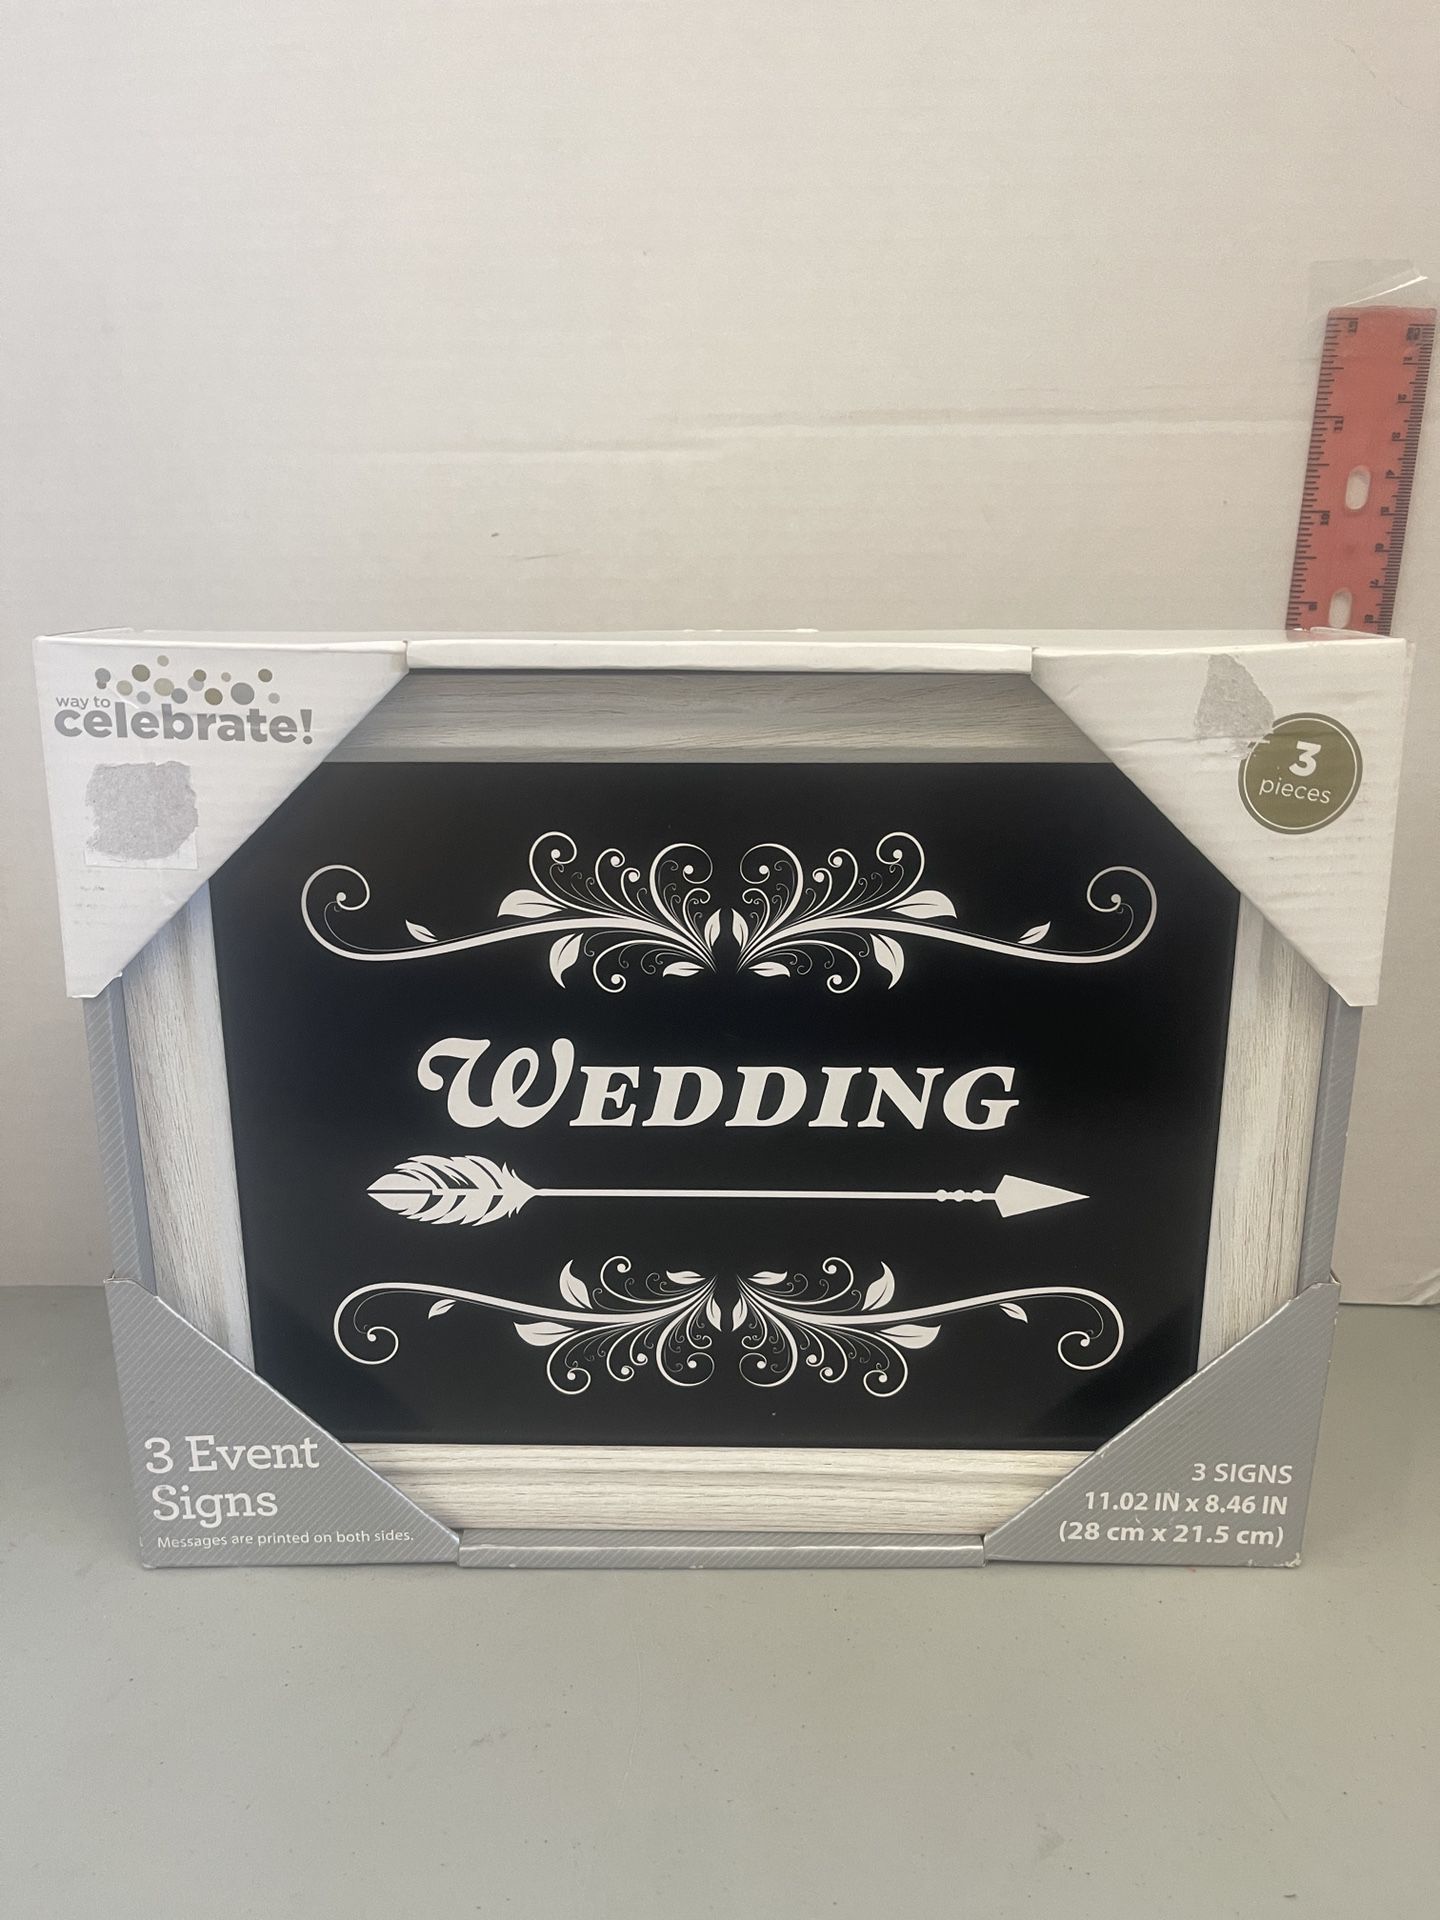 E105 - 3 Framed wedding signs.  11”x8.5” wood frame signs. Never used.  In the box. 